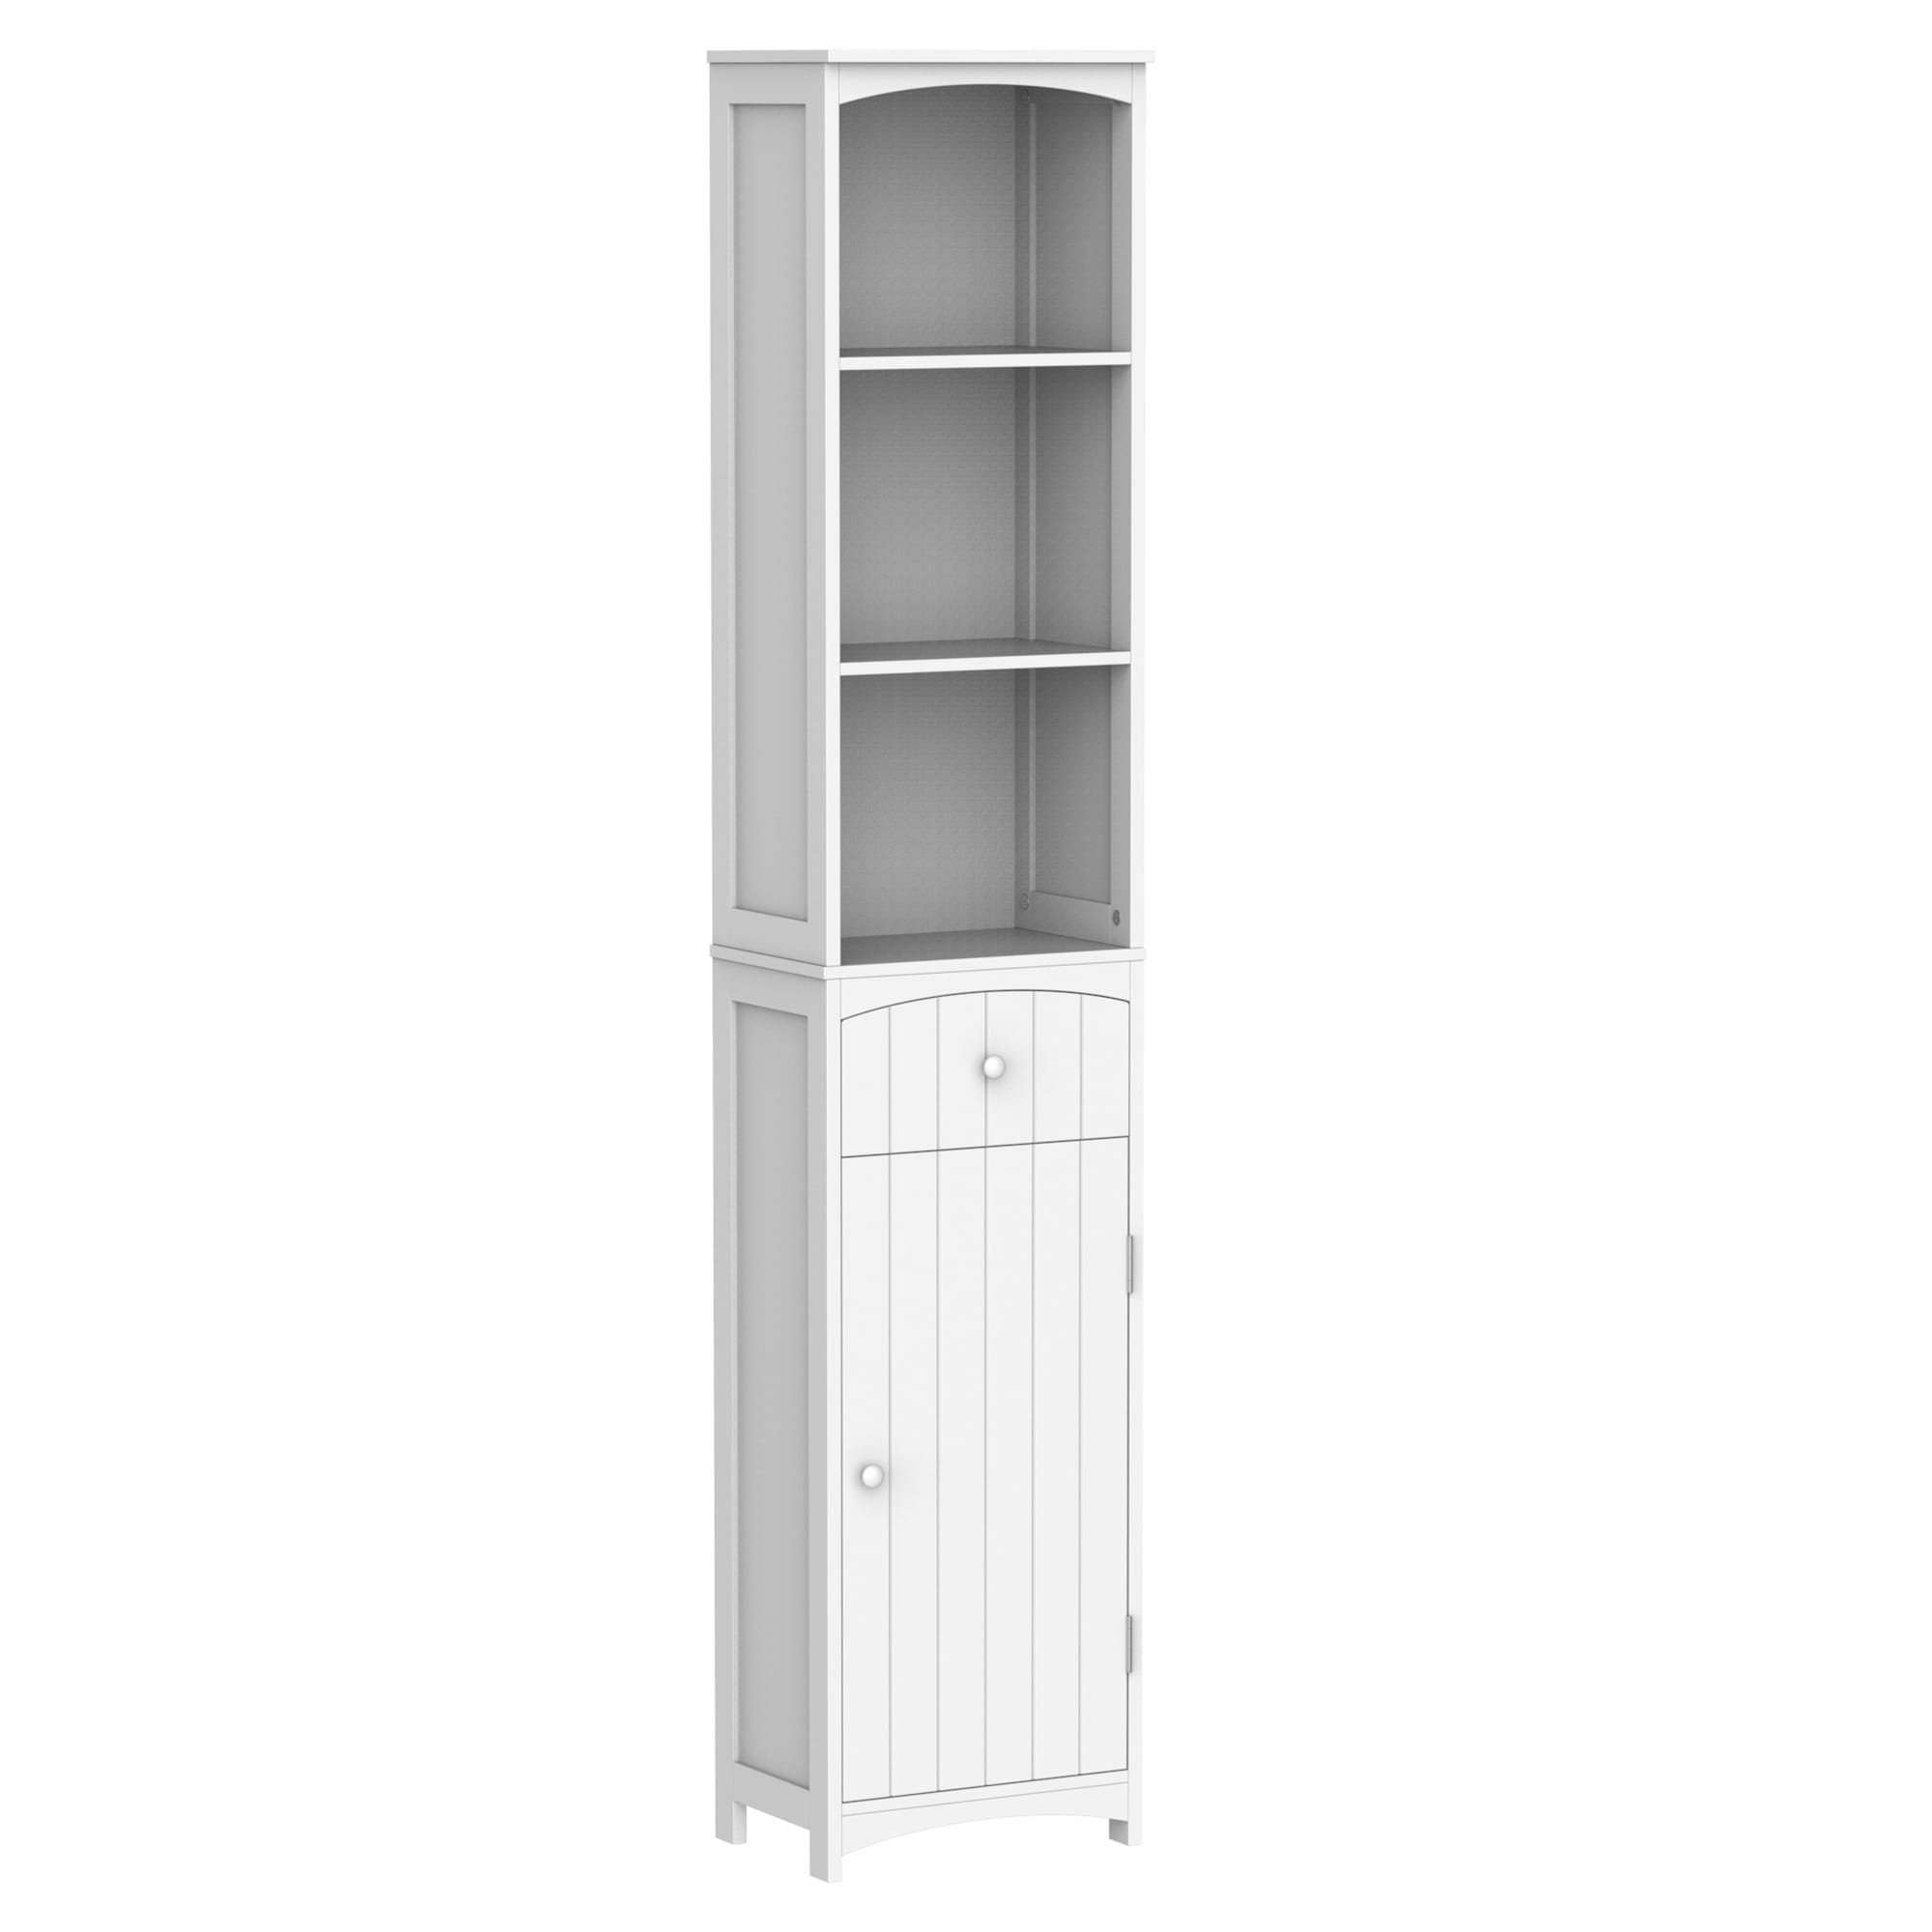 https://ak1.ostkcdn.com/images/products/is/images/direct/fe6242cdce8c07404df99a438be5e2de687a606b/HOMCOM-67%22-Tall-Bathroom-Storage-Cabinet%2C-Freestanding-Linen-Tower-with-3-Tier-Shelf%2C-Narrow-Side-Floor-Organizer%2C-White.jpg